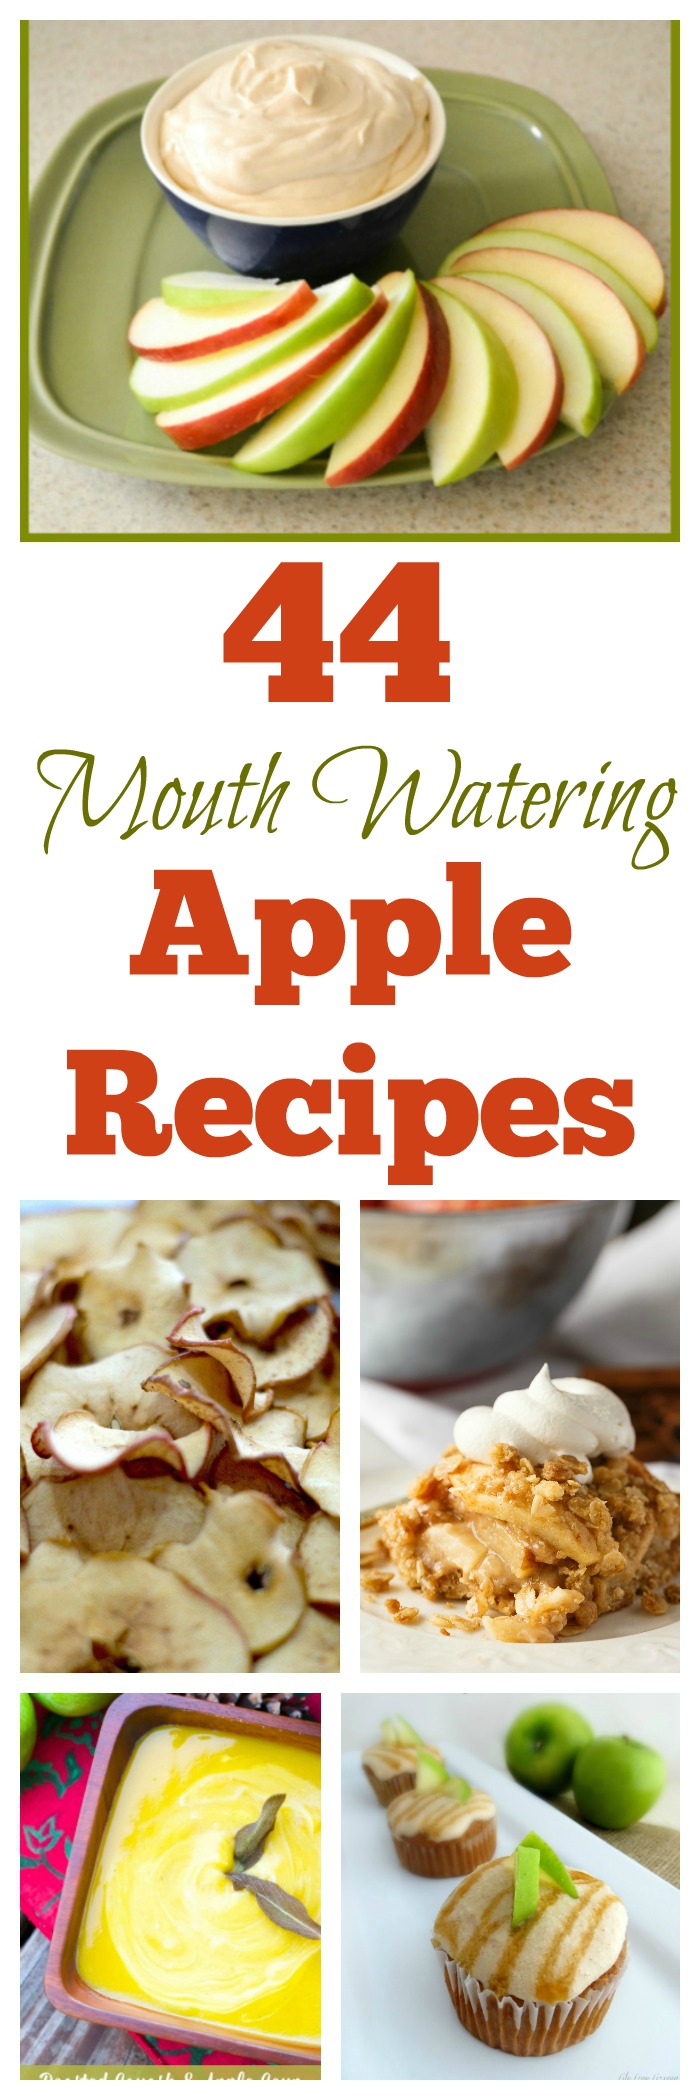 Fall is a great time to go apple picking and make some delicious apple recipes. Get the kids involved in making these apple recipes.